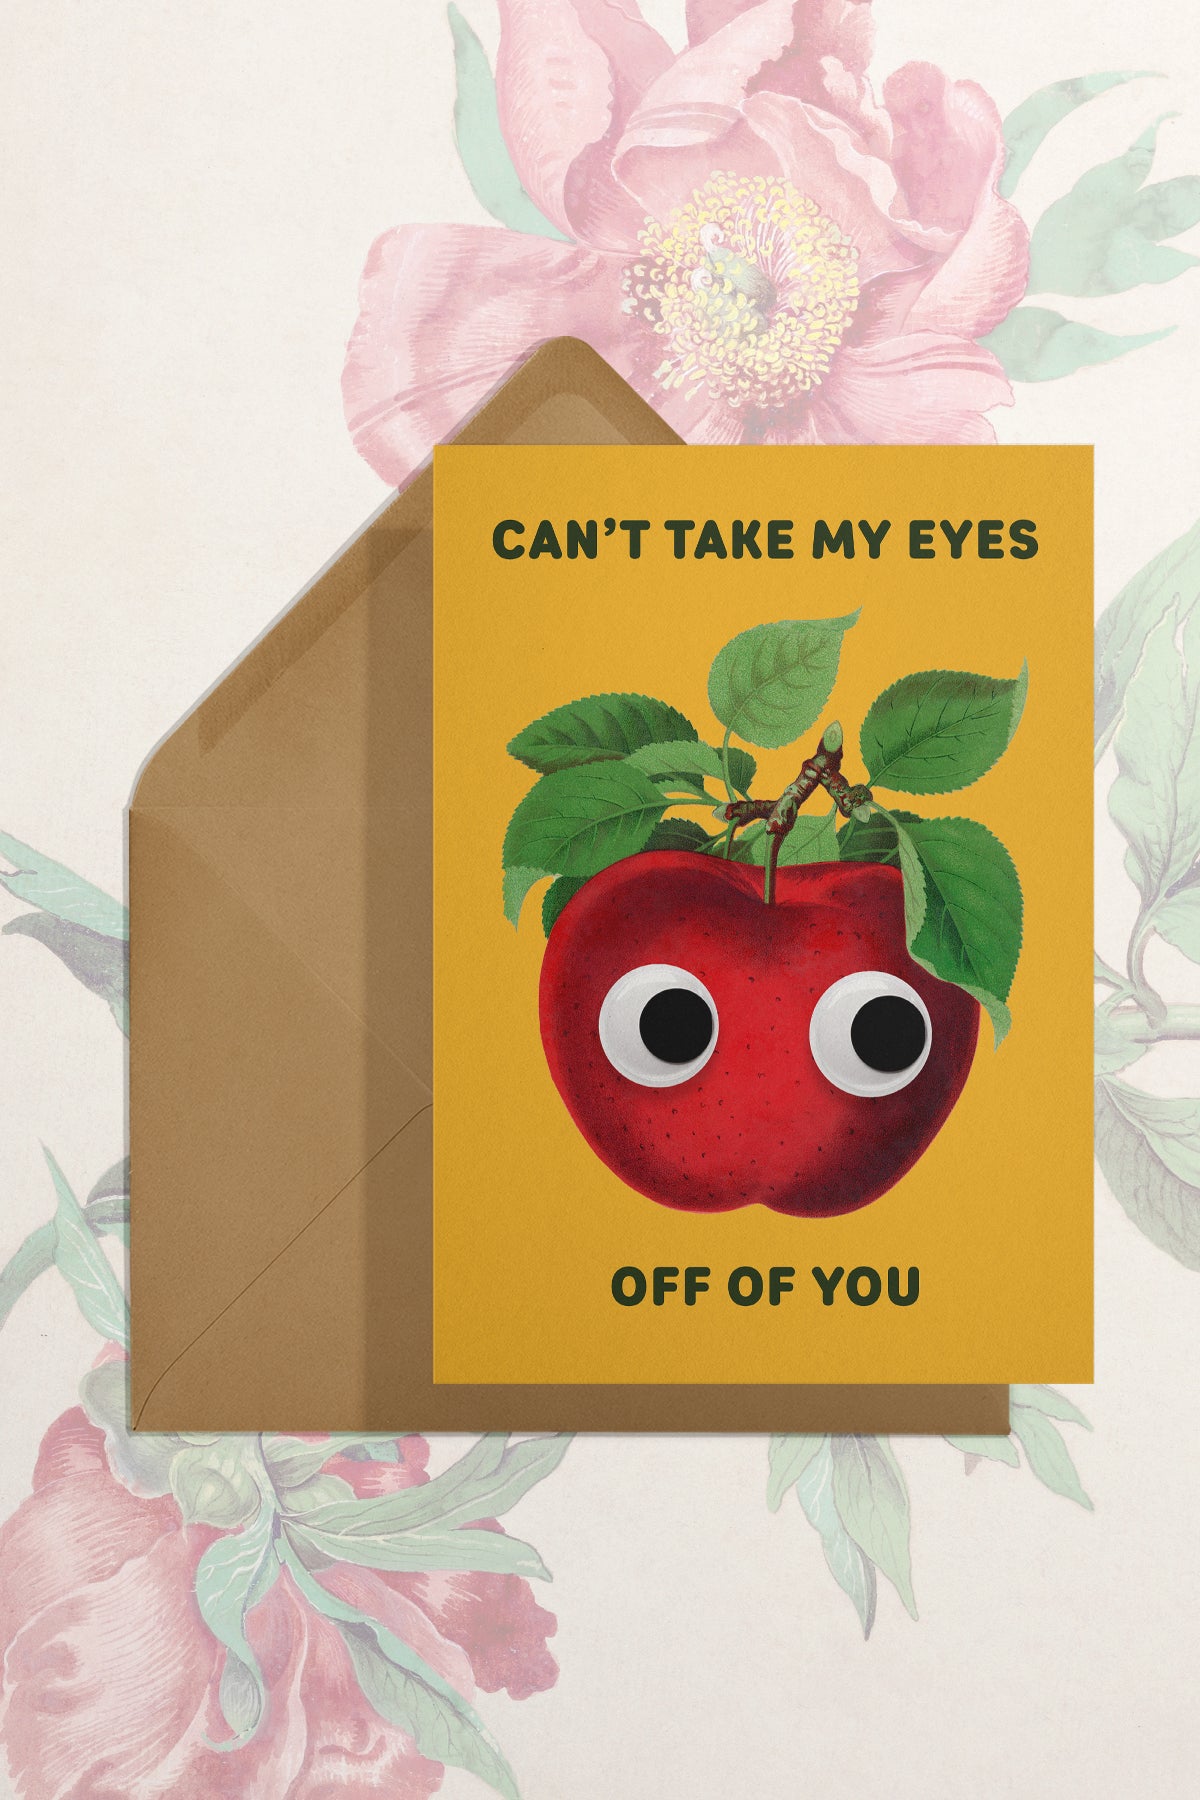 Can't Take my Eyes Card